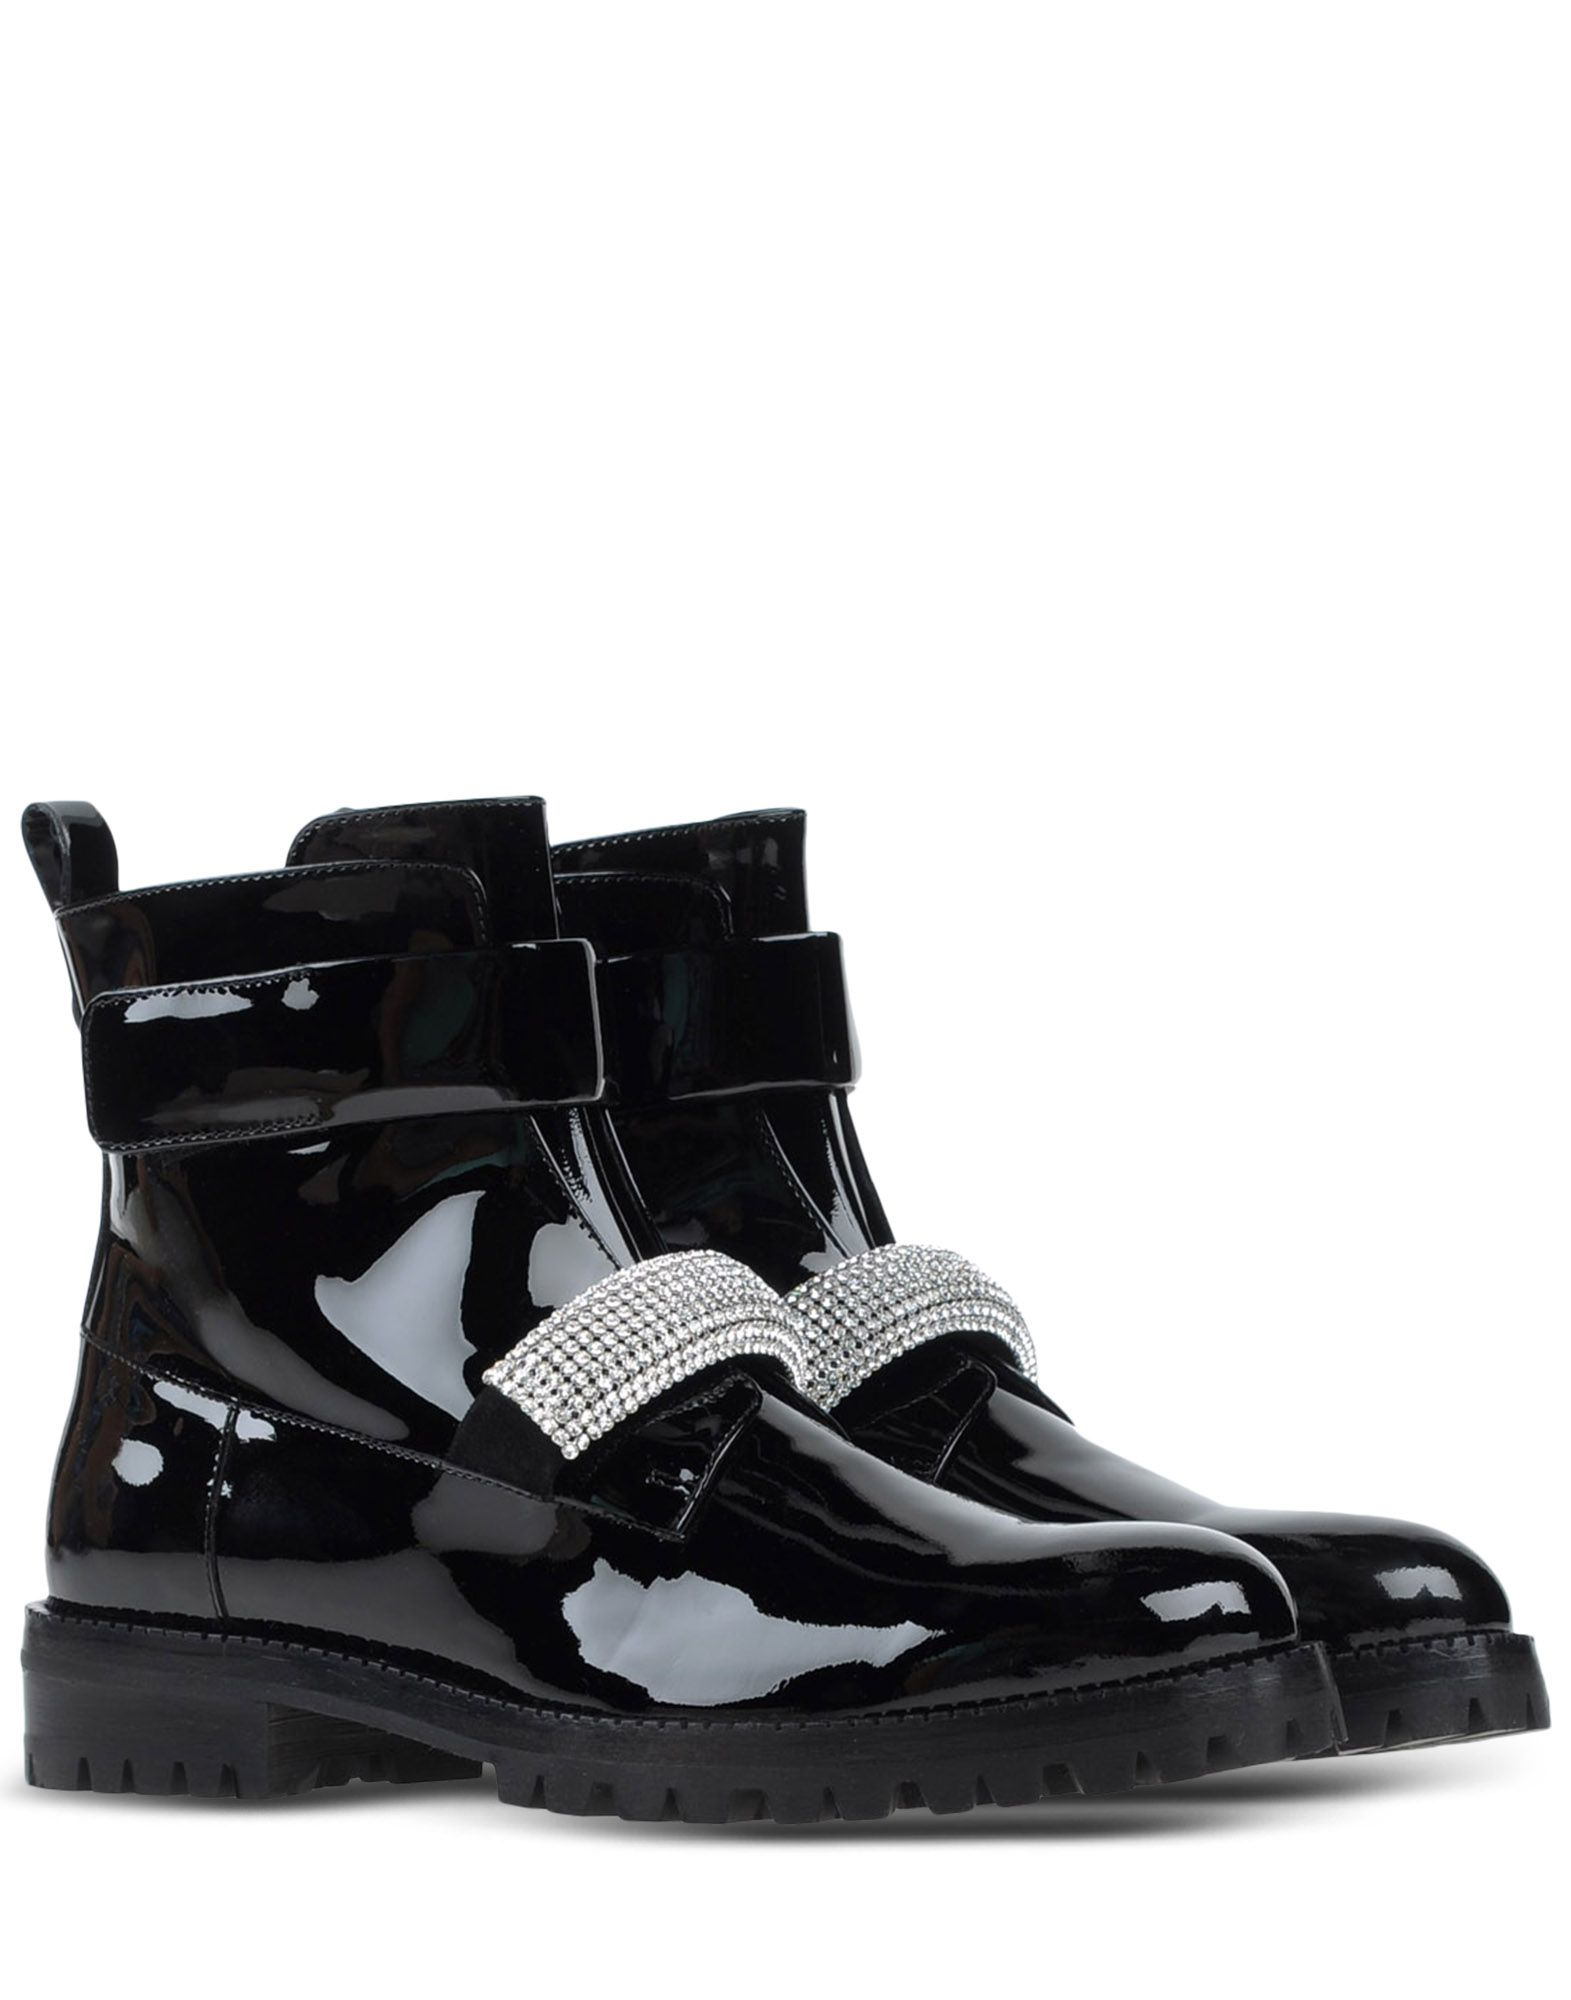 Christopher kane Ankle Boots in Black | Lyst